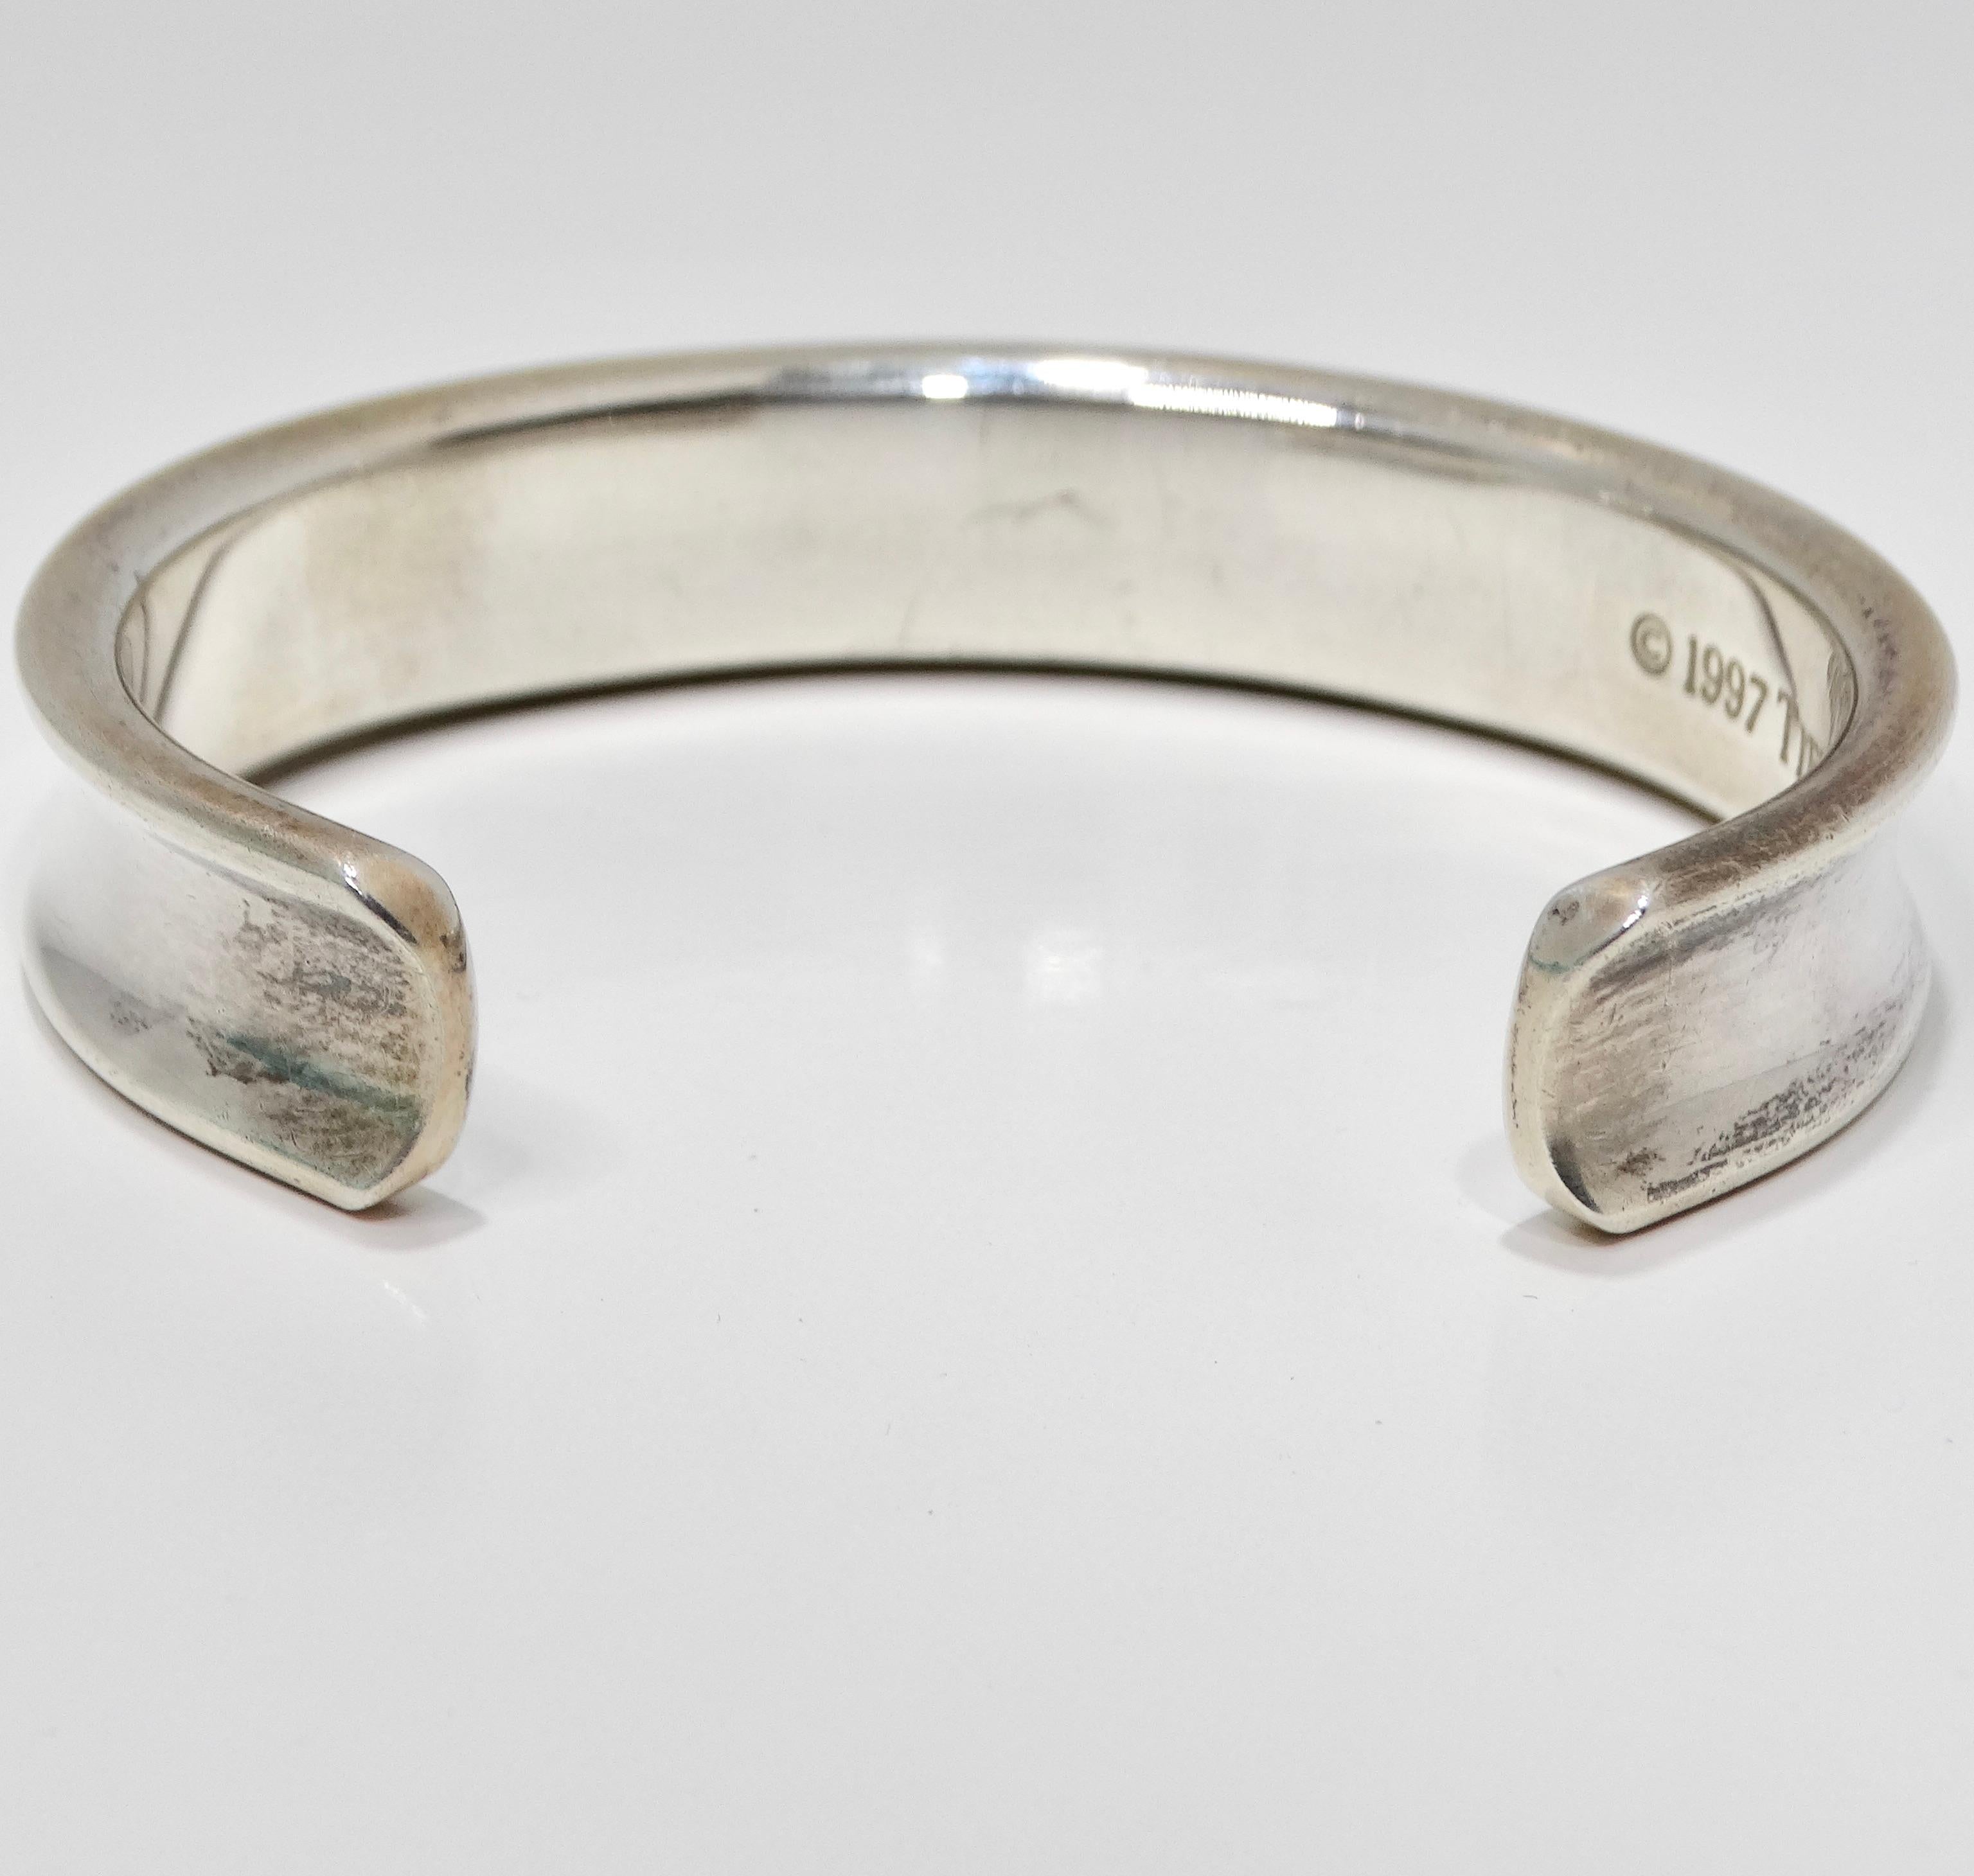 Tiffany & Co 1997 Silver 1925 Engraved Cuff Bracelet In Good Condition For Sale In Scottsdale, AZ